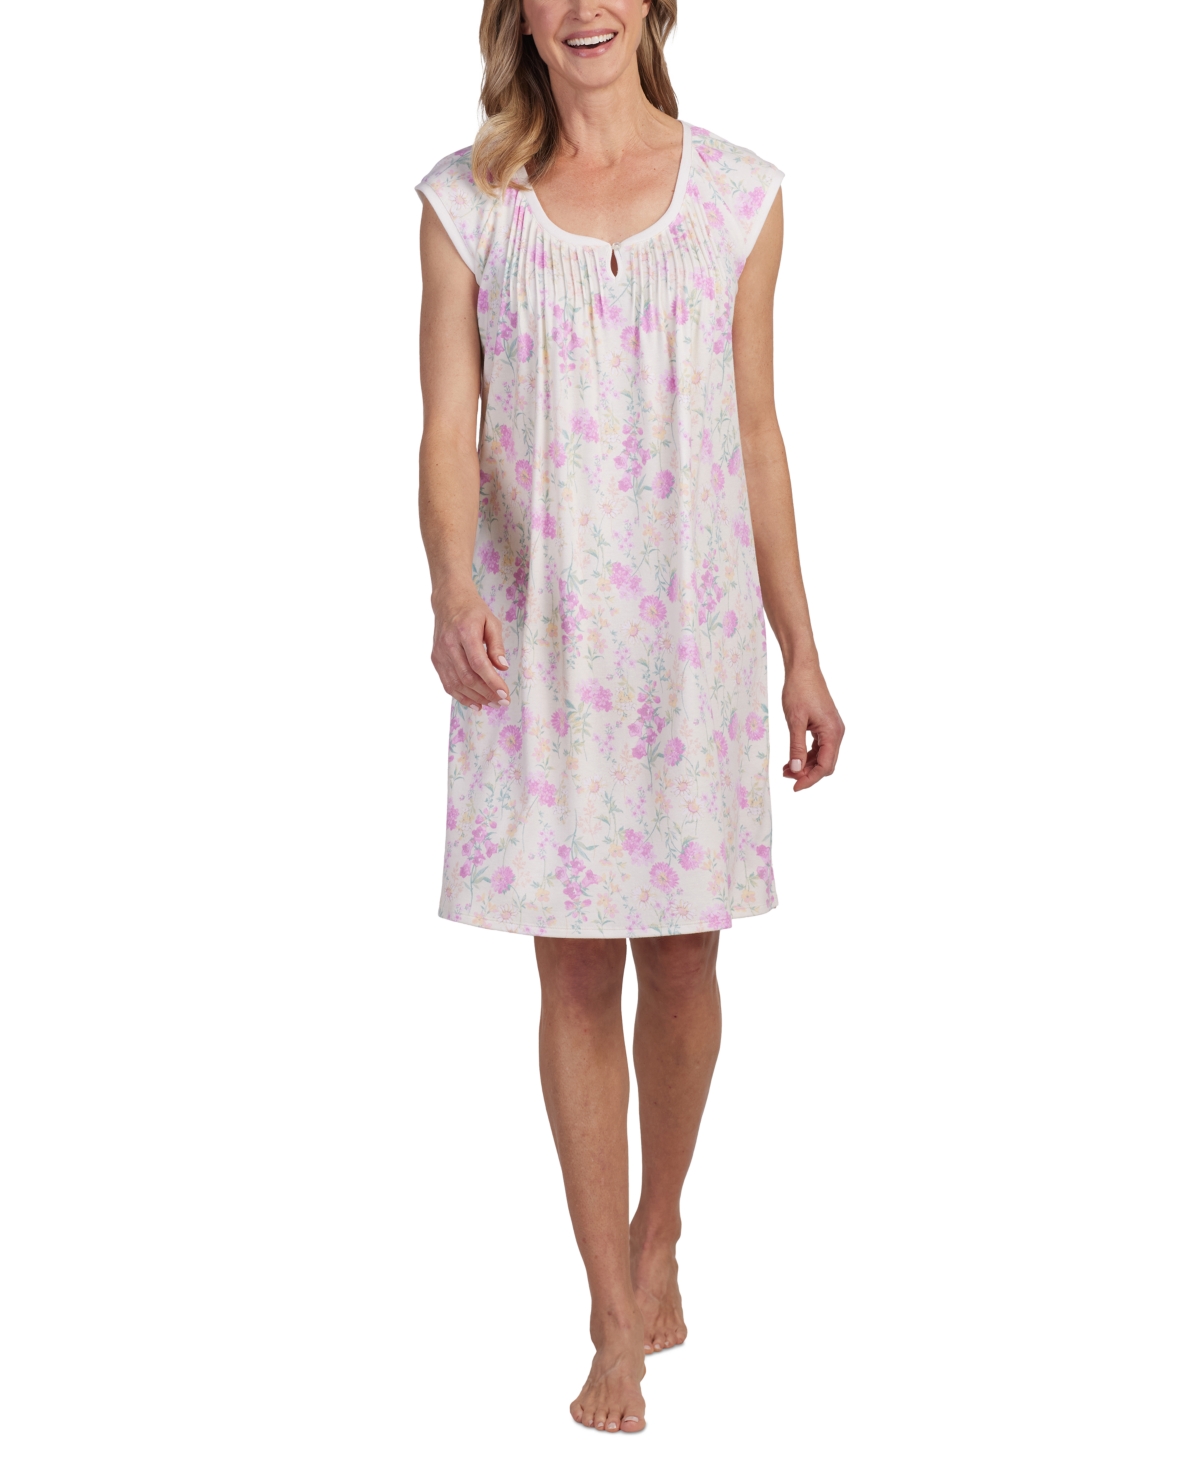 Women's Sleeveless Floral Nightgown - Pink Floral